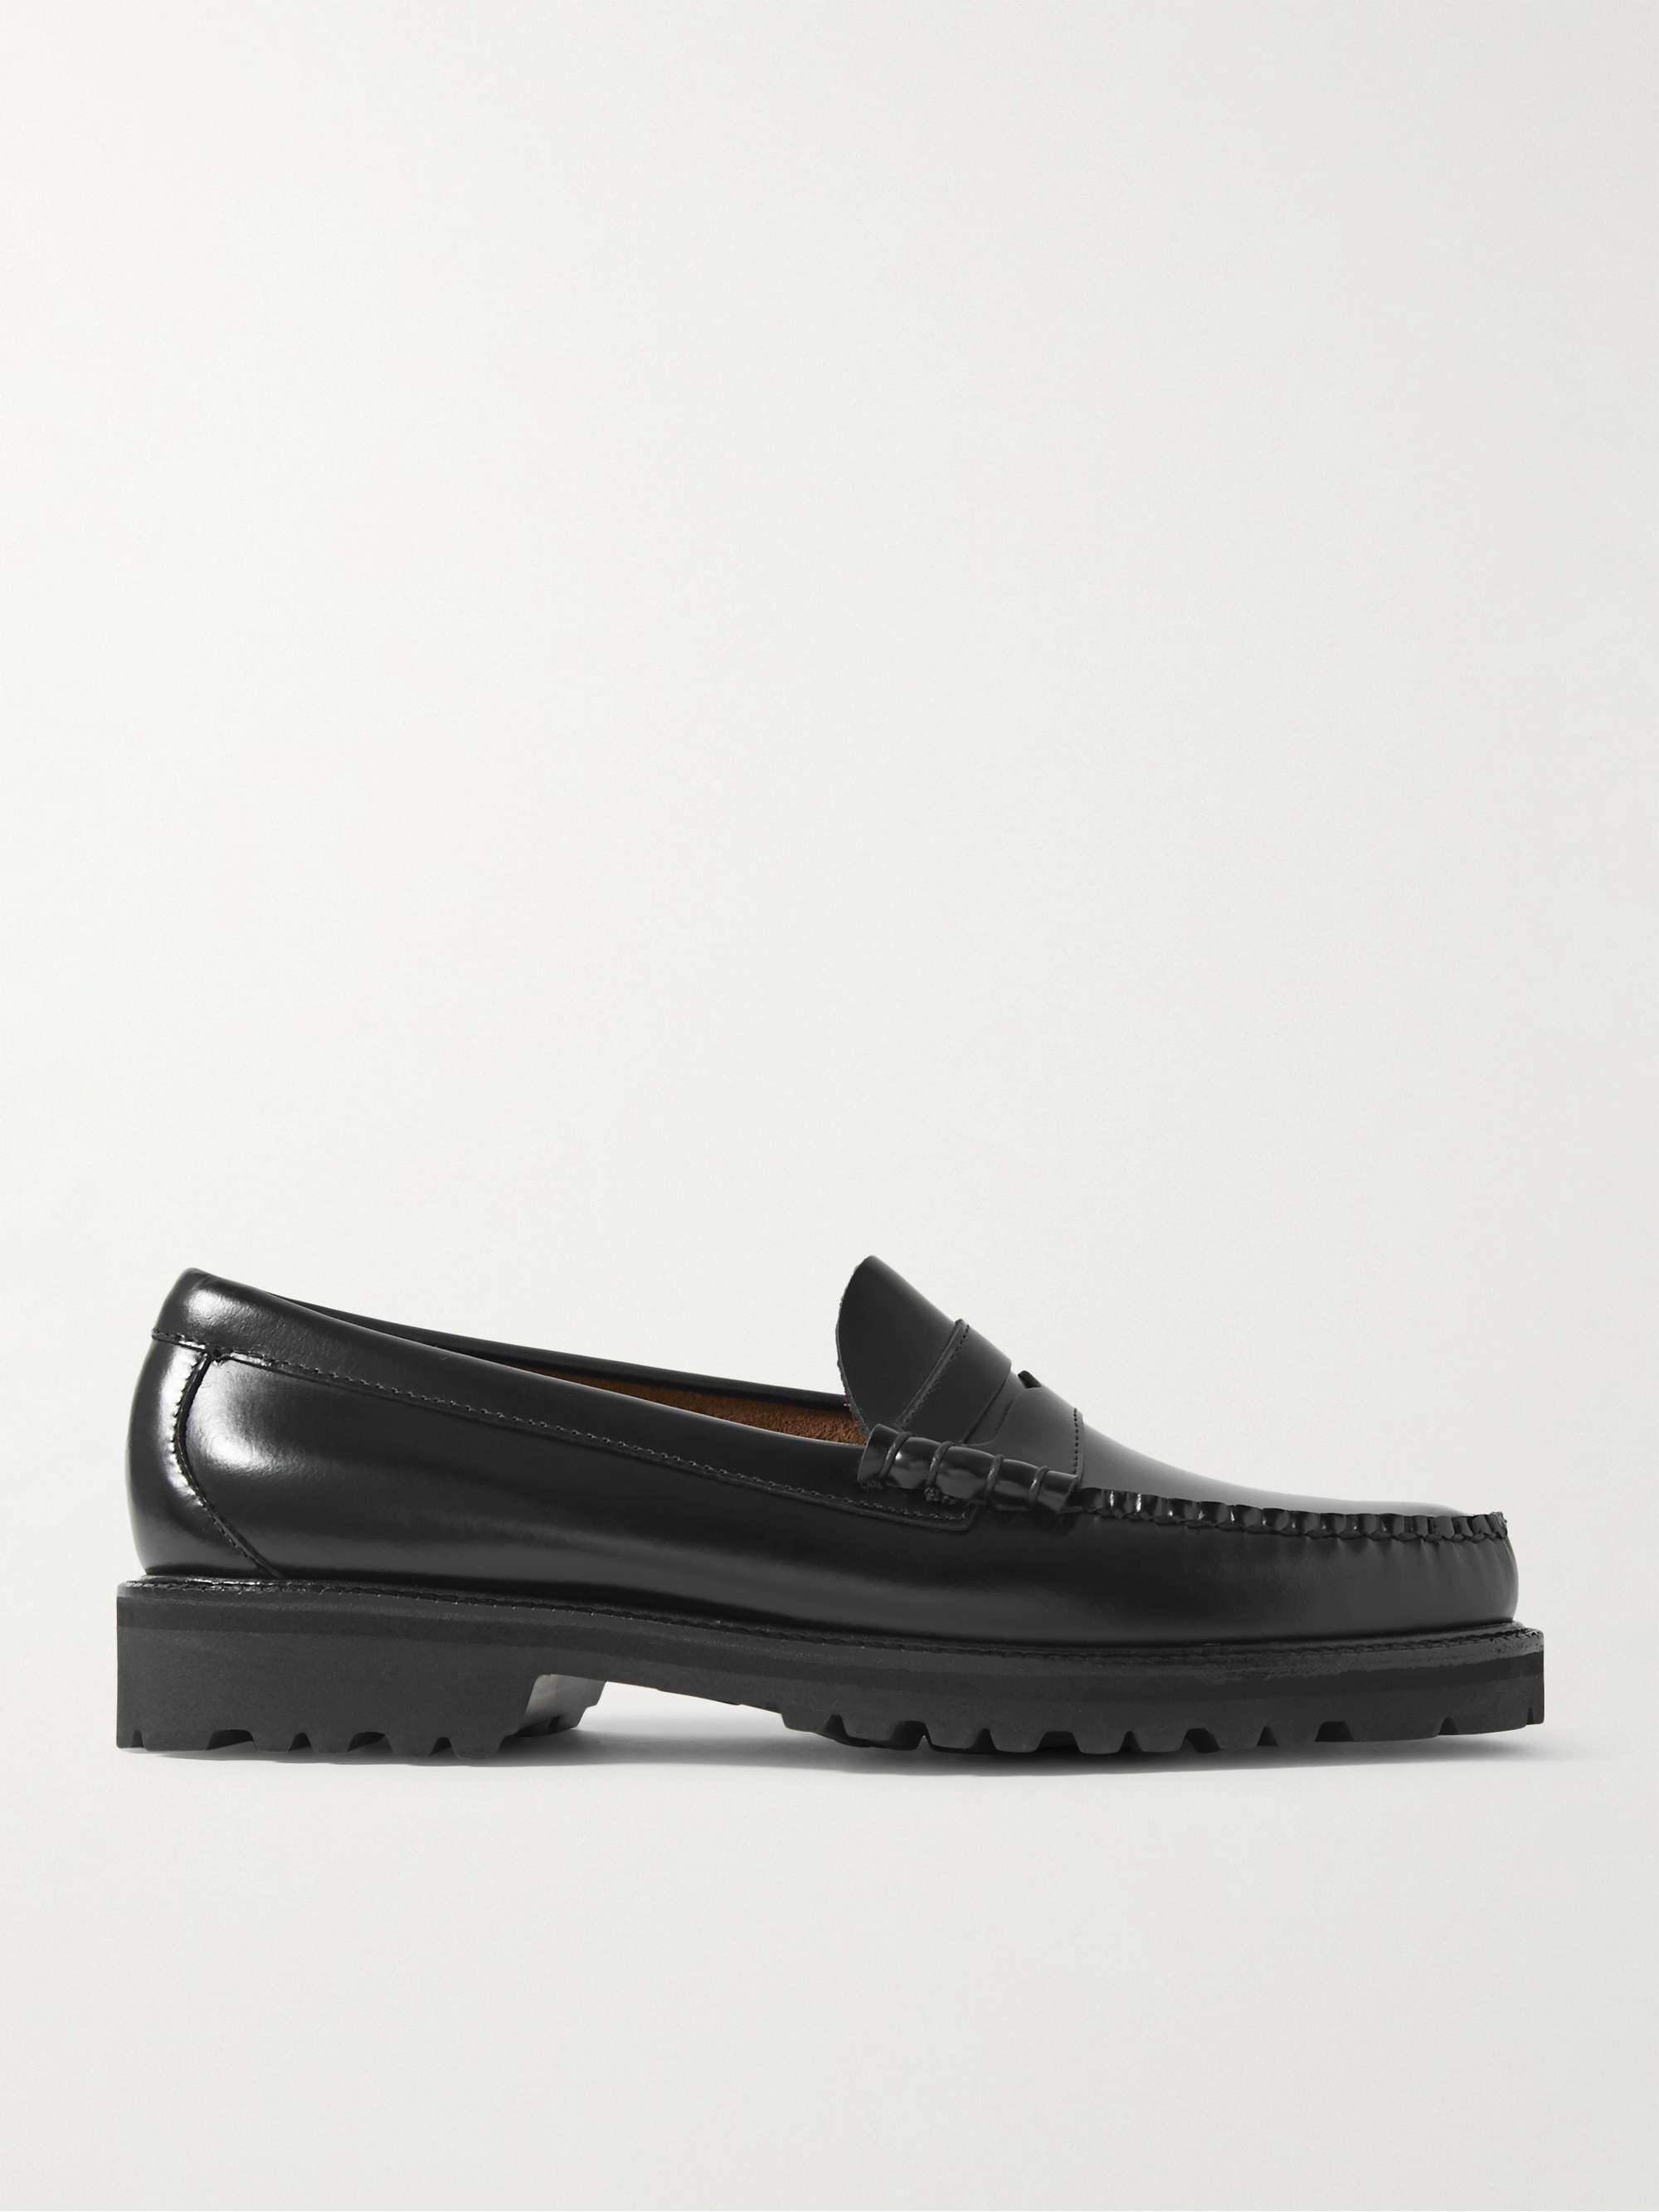 Black Weejuns 90 Larson Leather Penny Loafers | G.H. BASS & CO. | MR PORTER